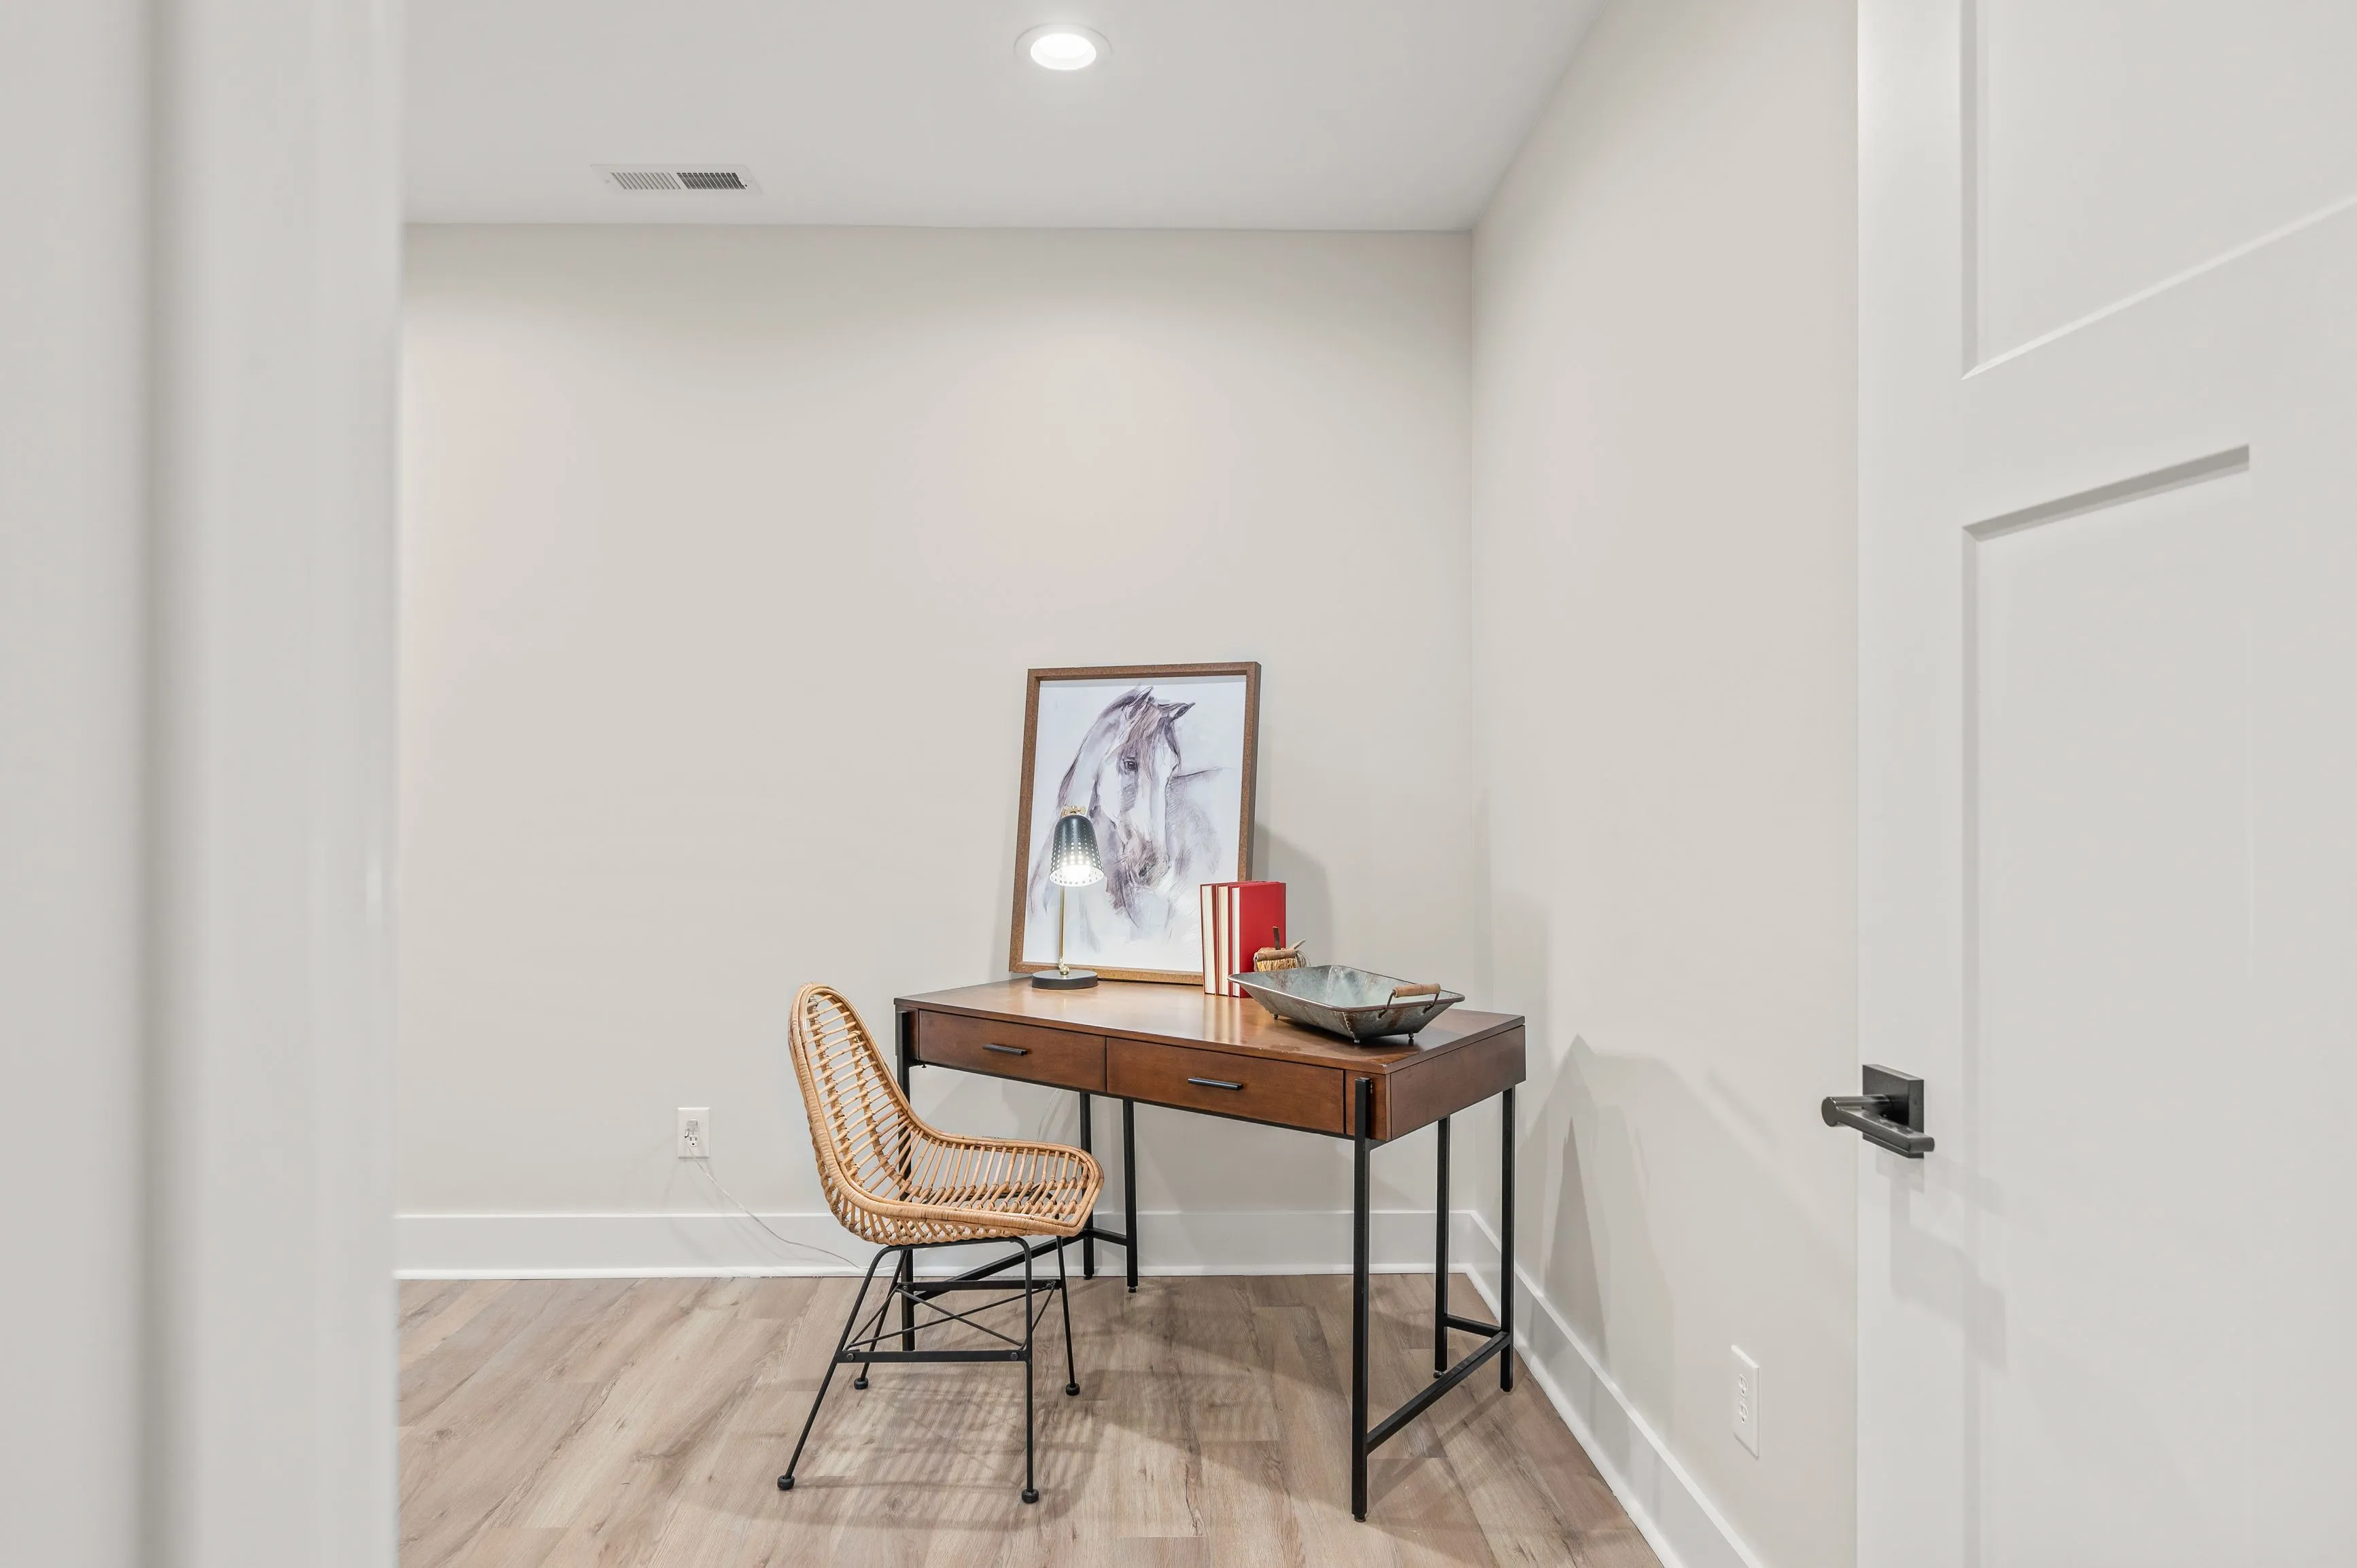 A minimalist home office space with a wooden desk, a framed picture on it, and a chair against a white wall.